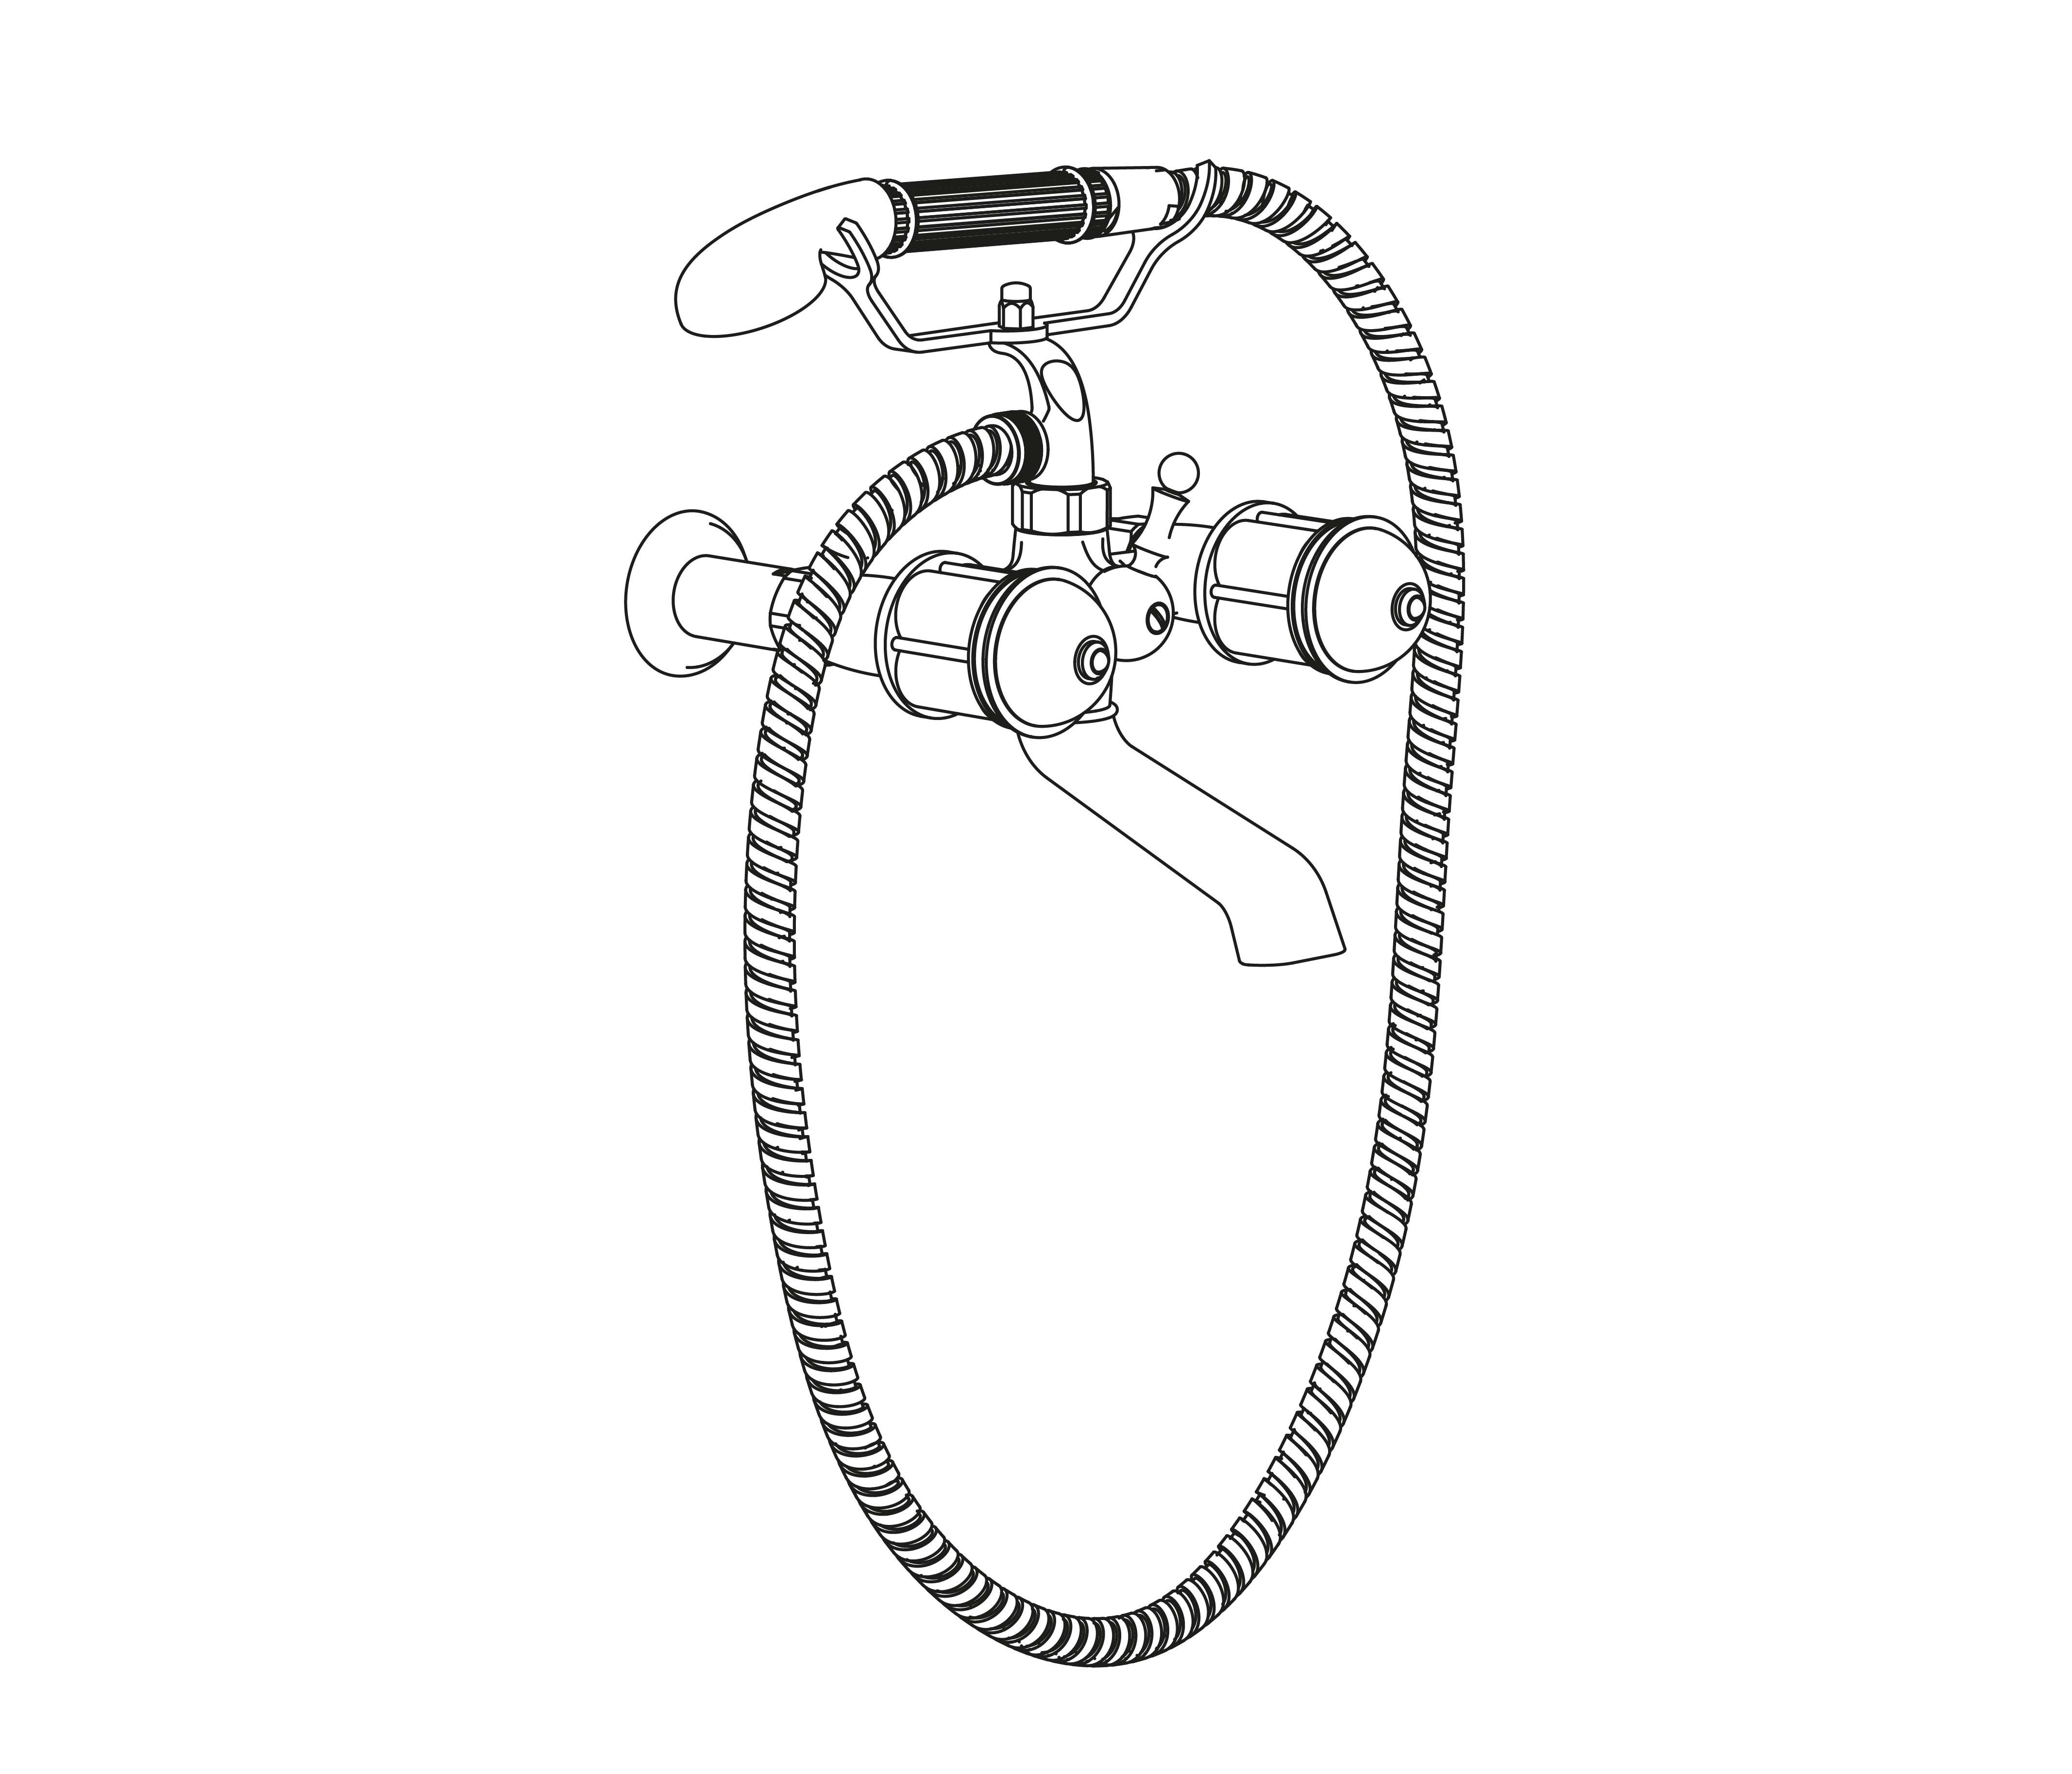 S179-3201 Wall mounted bath and shower mixer